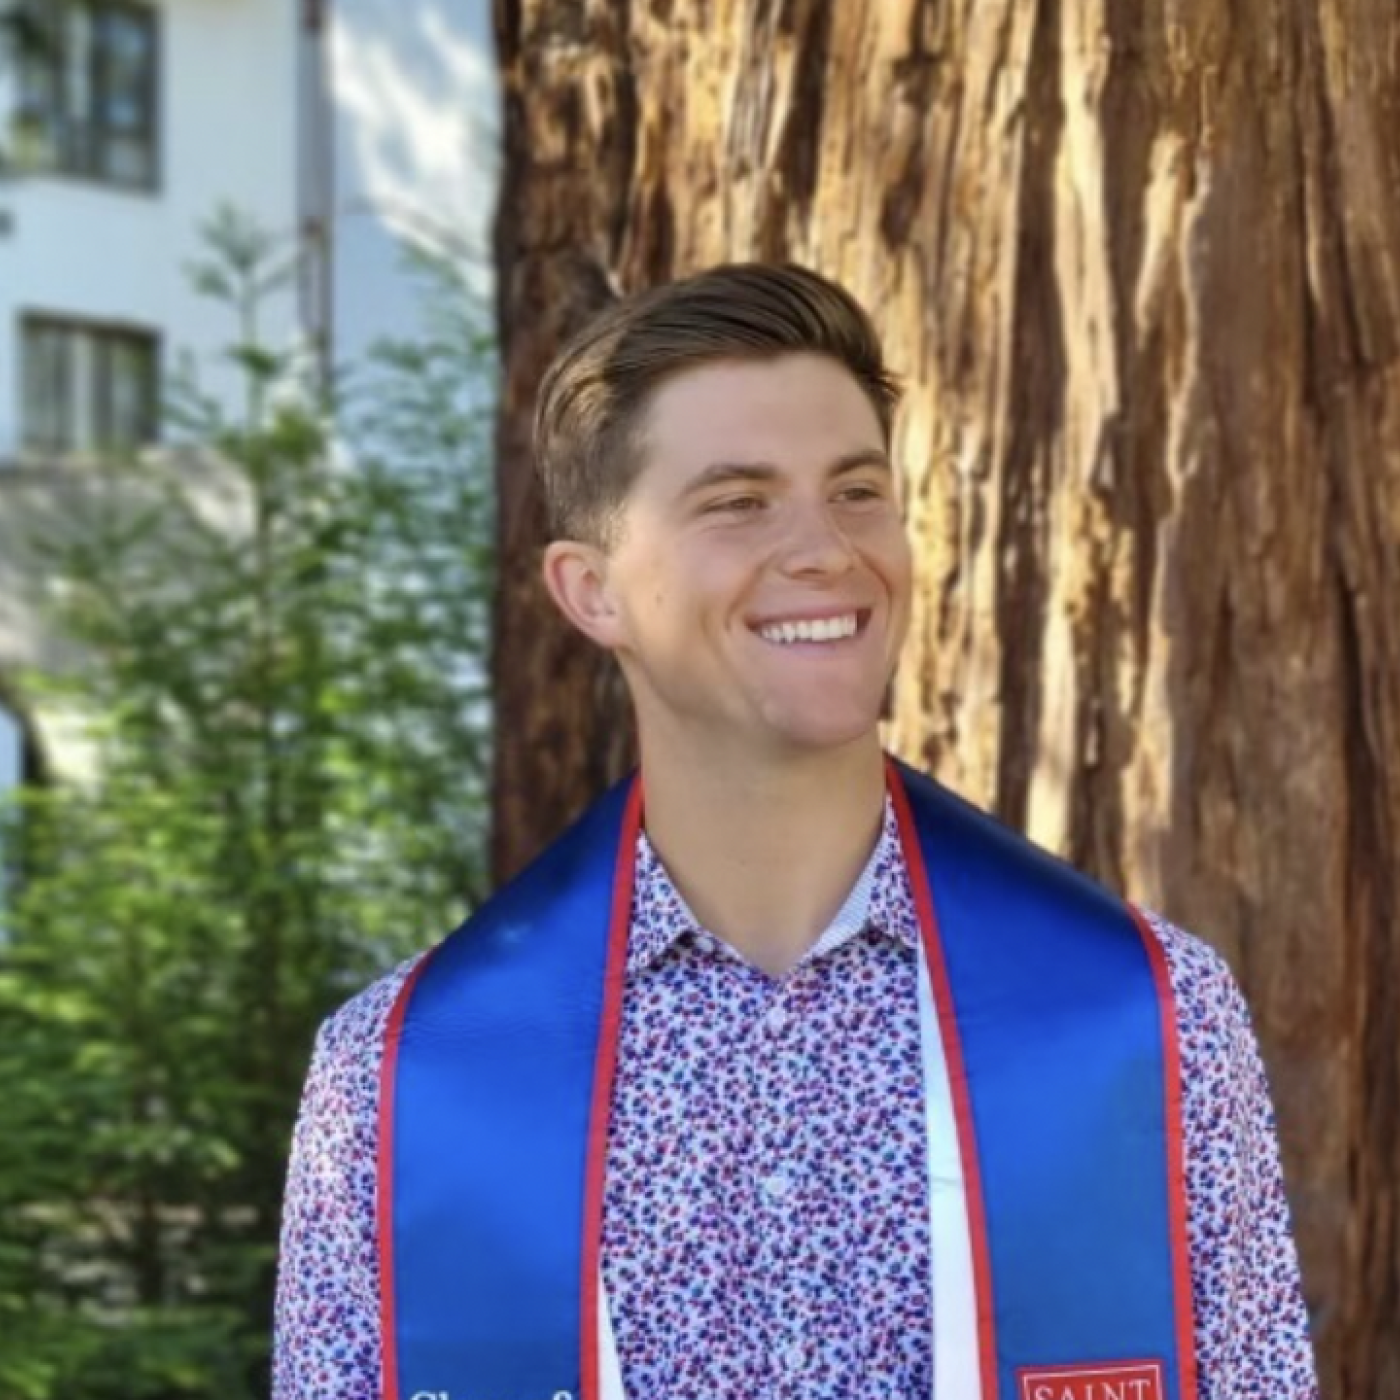 A student posing with a graduation stole around his neck